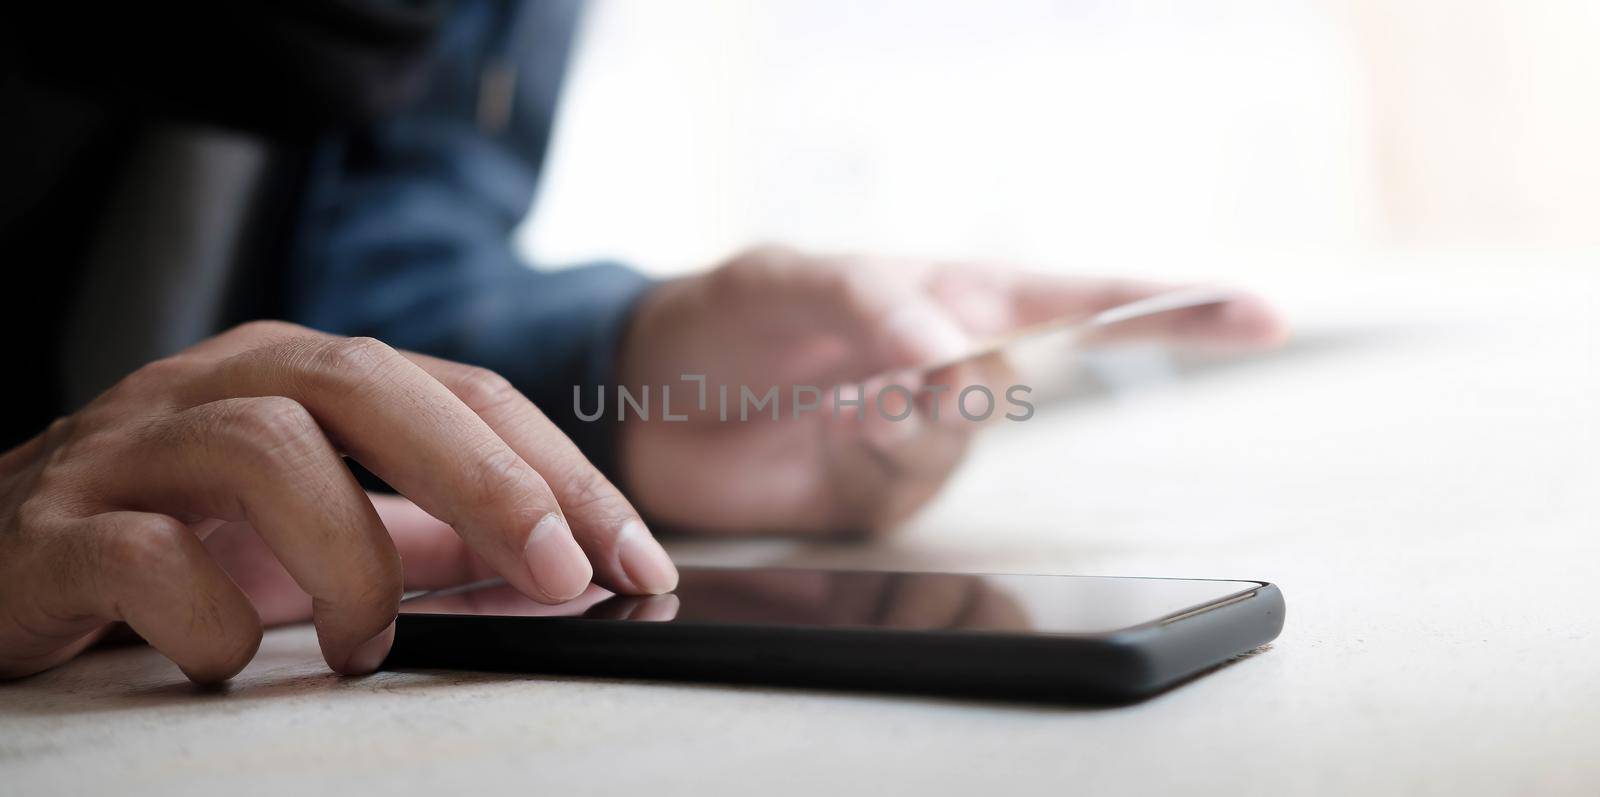 Online payment,Man's hands holding a credit card and using smart phone for online shopping by wichayada